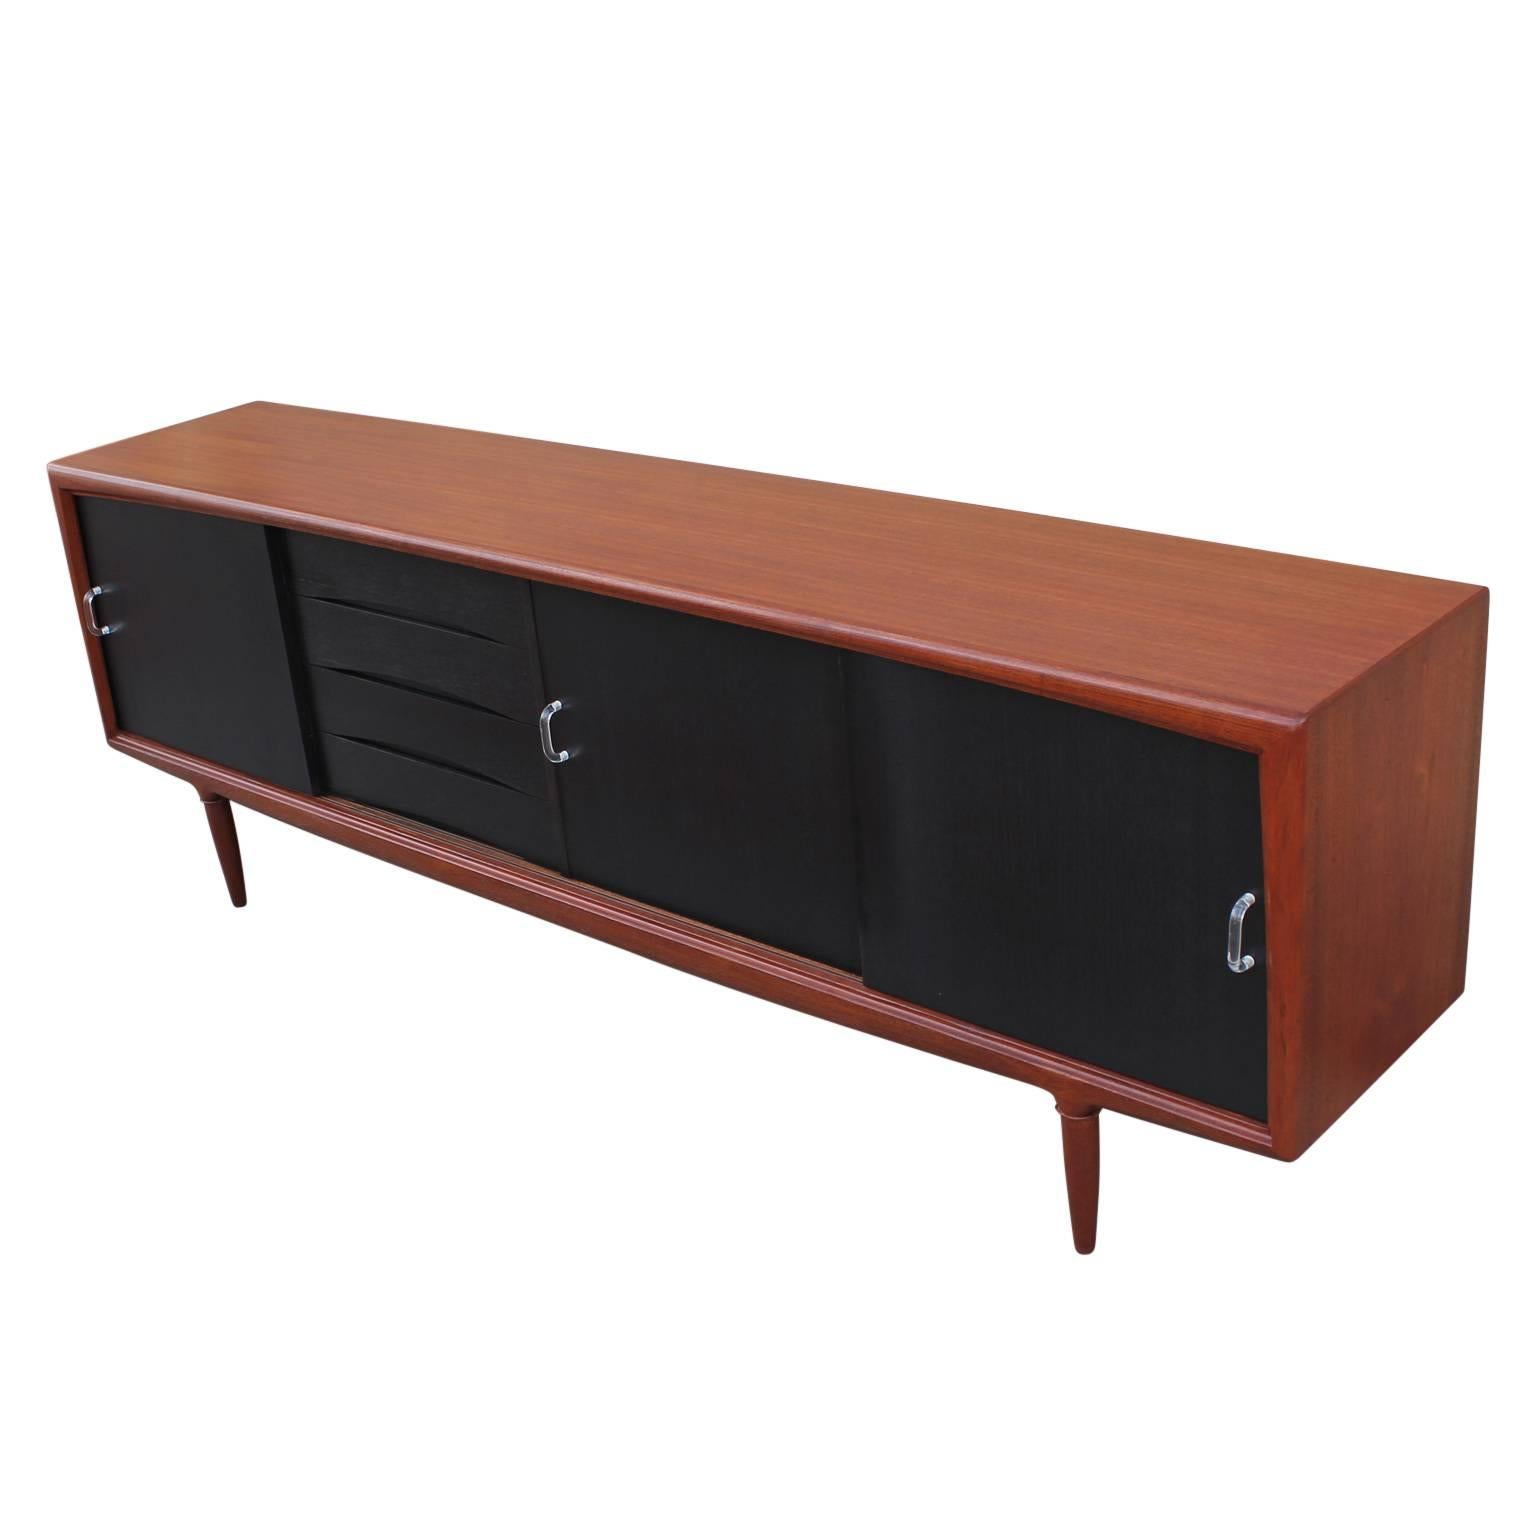 Two-Tone Modern Danish Credenza or Sideboard Lucite Handles